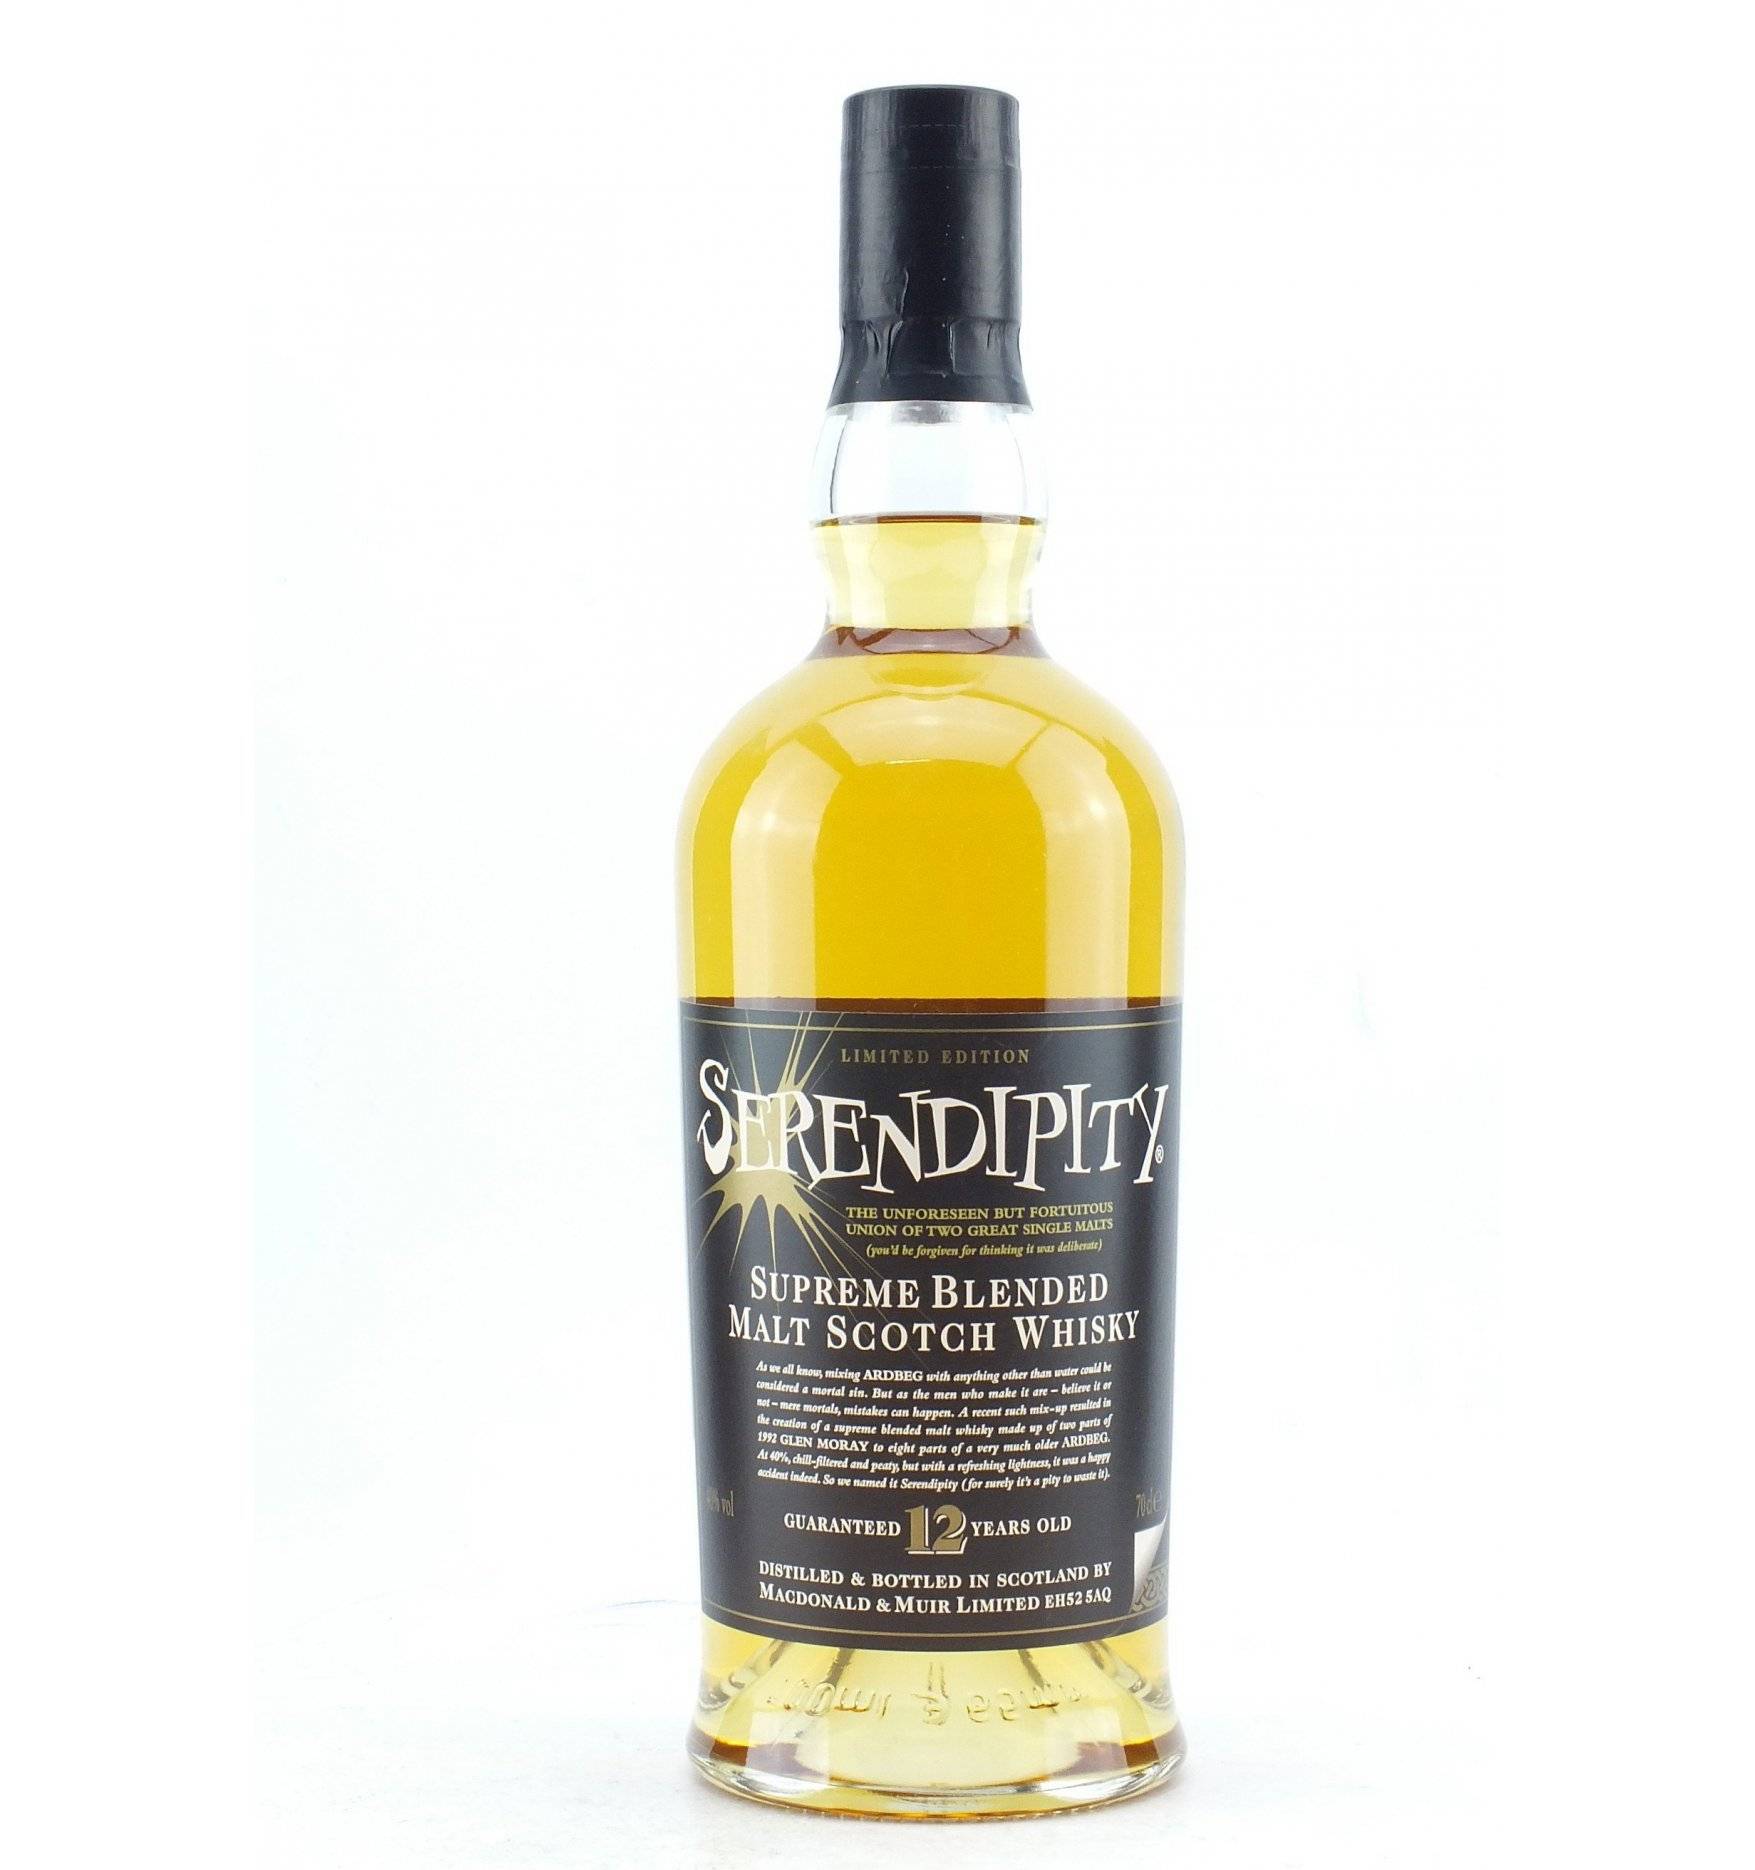 Ardbeg 12 Years Old Serendipity Limited Edition Just Whisky Auctions